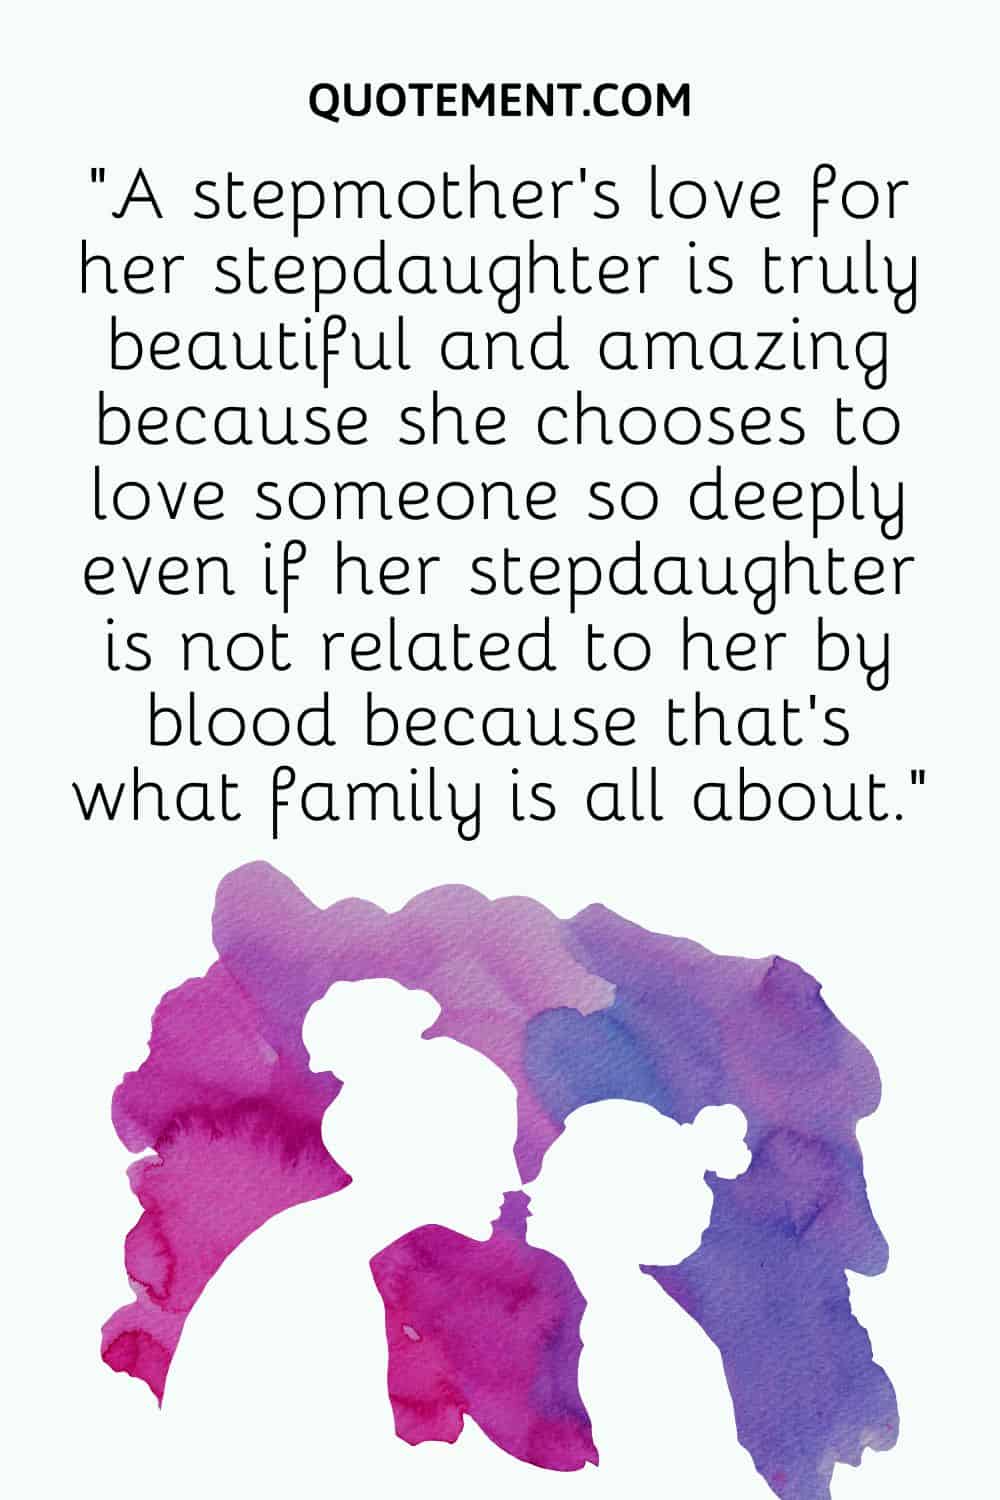 A stepmother’s love for her stepdaughter is truly beautiful and amazing